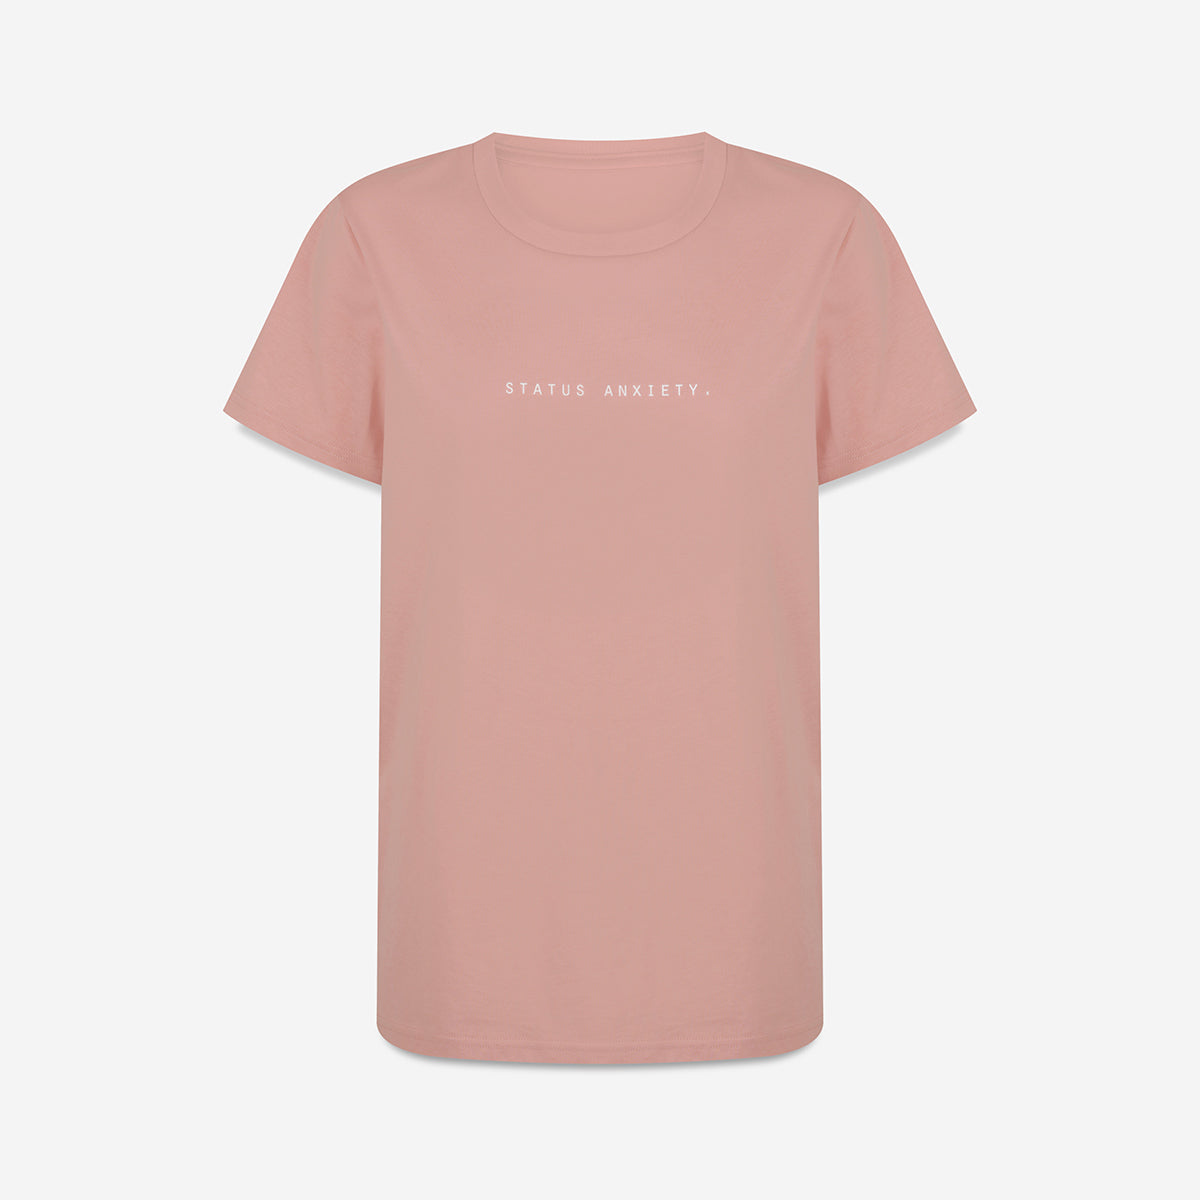 Think It Over Women's Tee - Rose